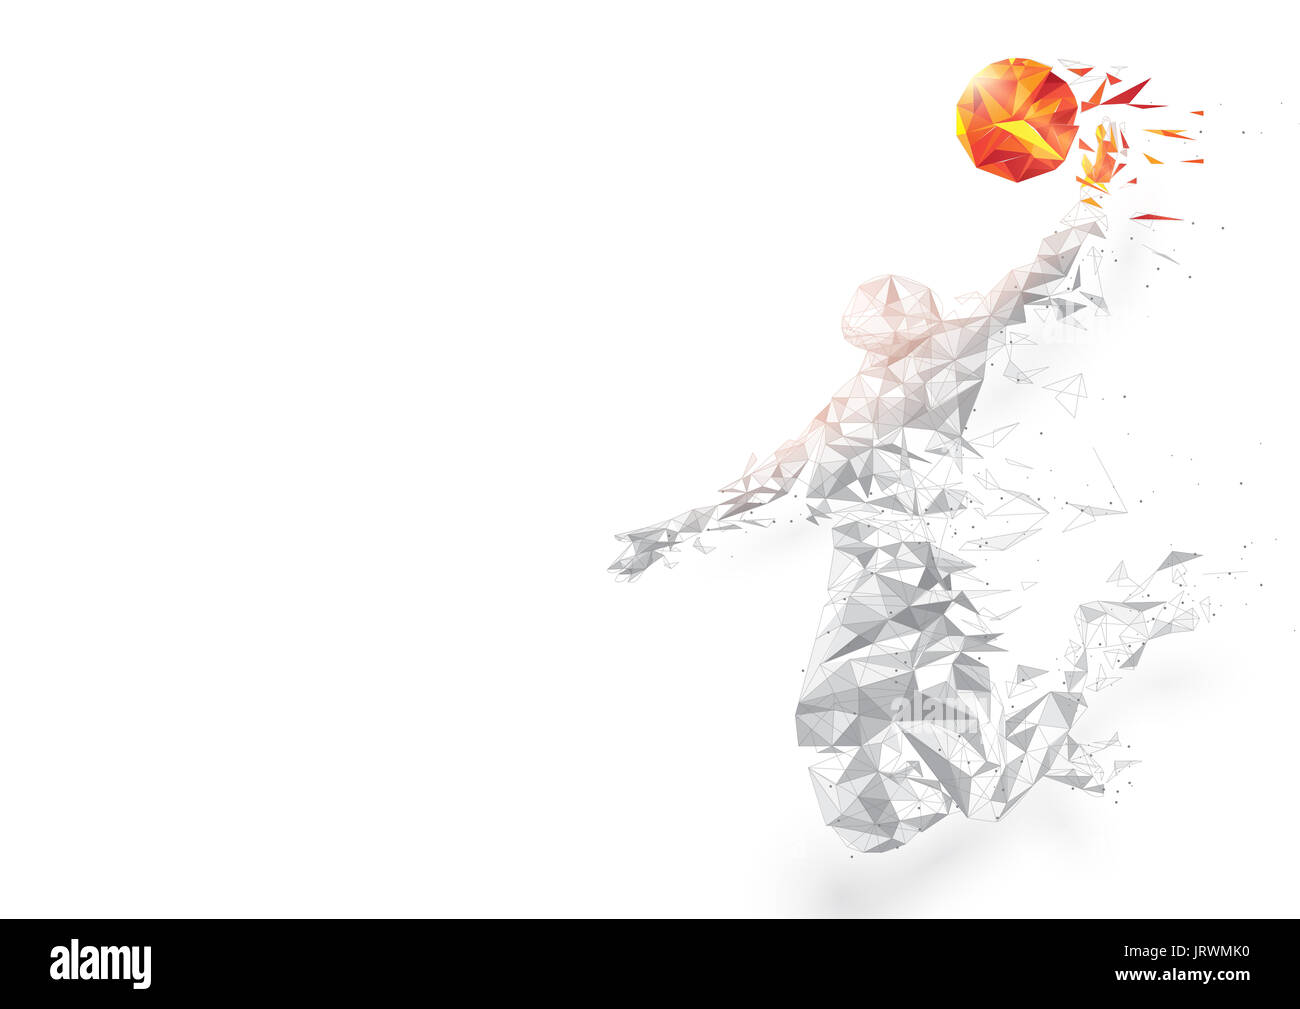 Abstract low polygon basketball player jumping dunking wireframe mesh on white background Stock Photo